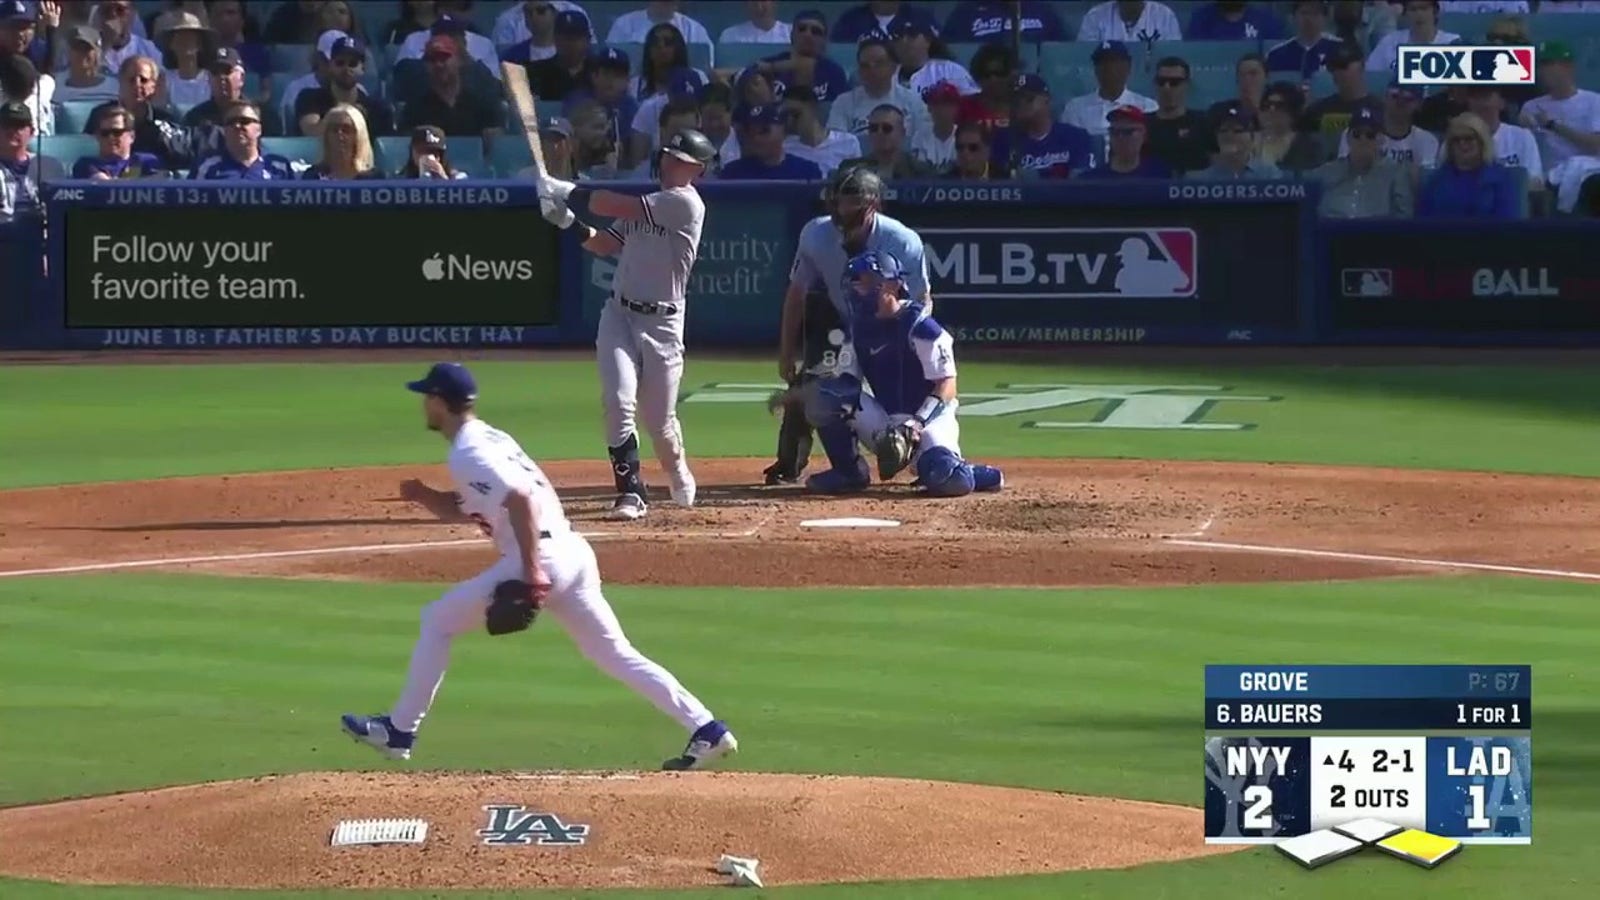 Jake Bauers belts his SECOND homer of the game to extend Yankees' lead over Dodgers